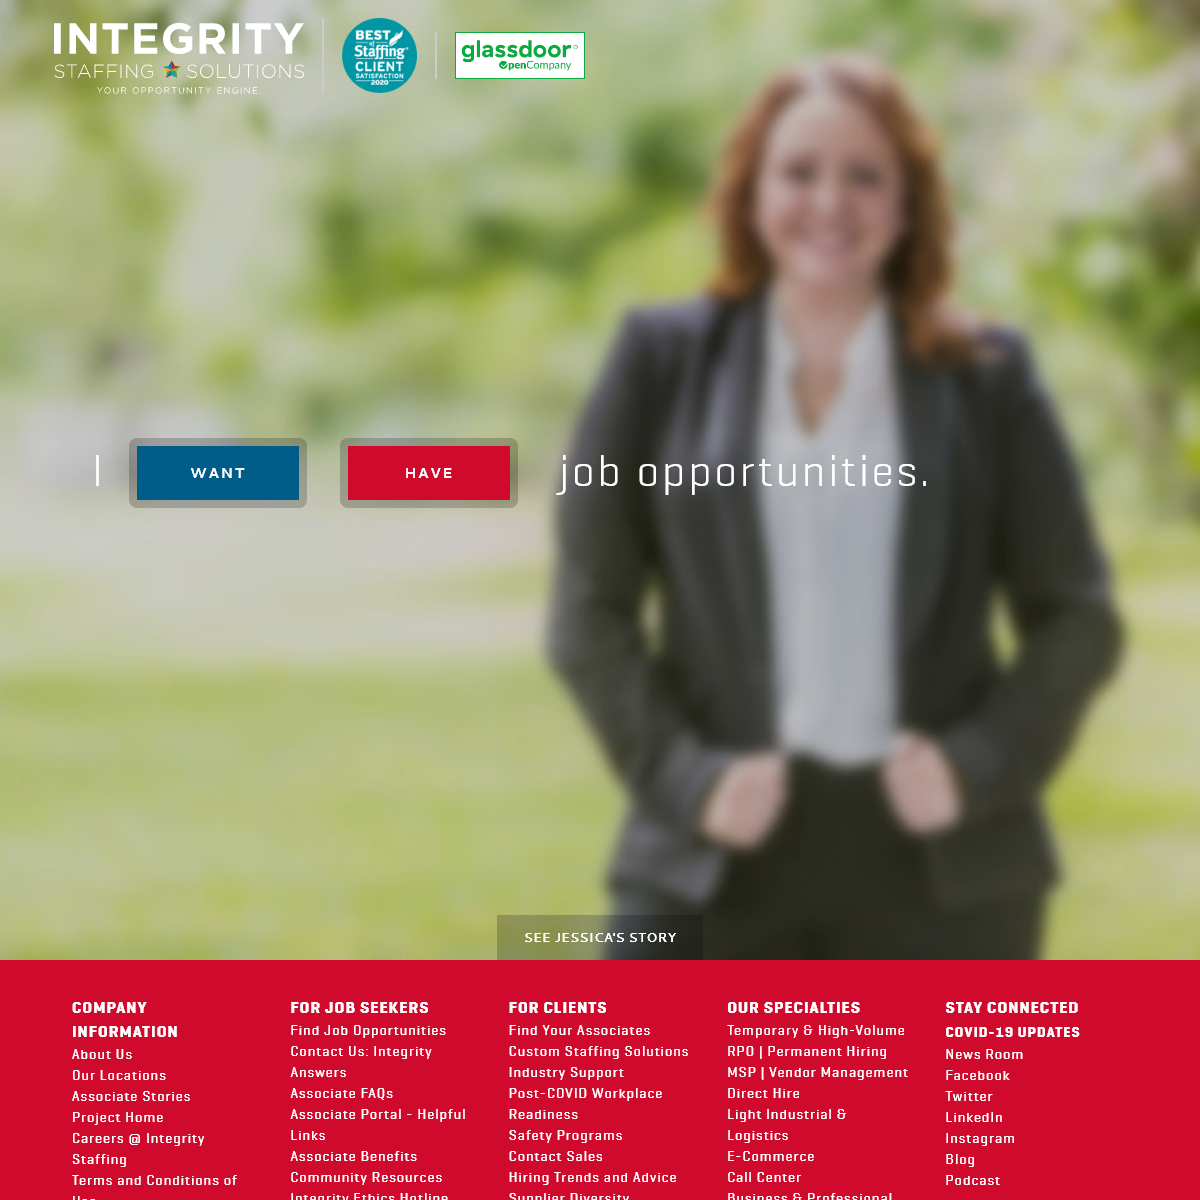 A complete backup of integritystaffing.com